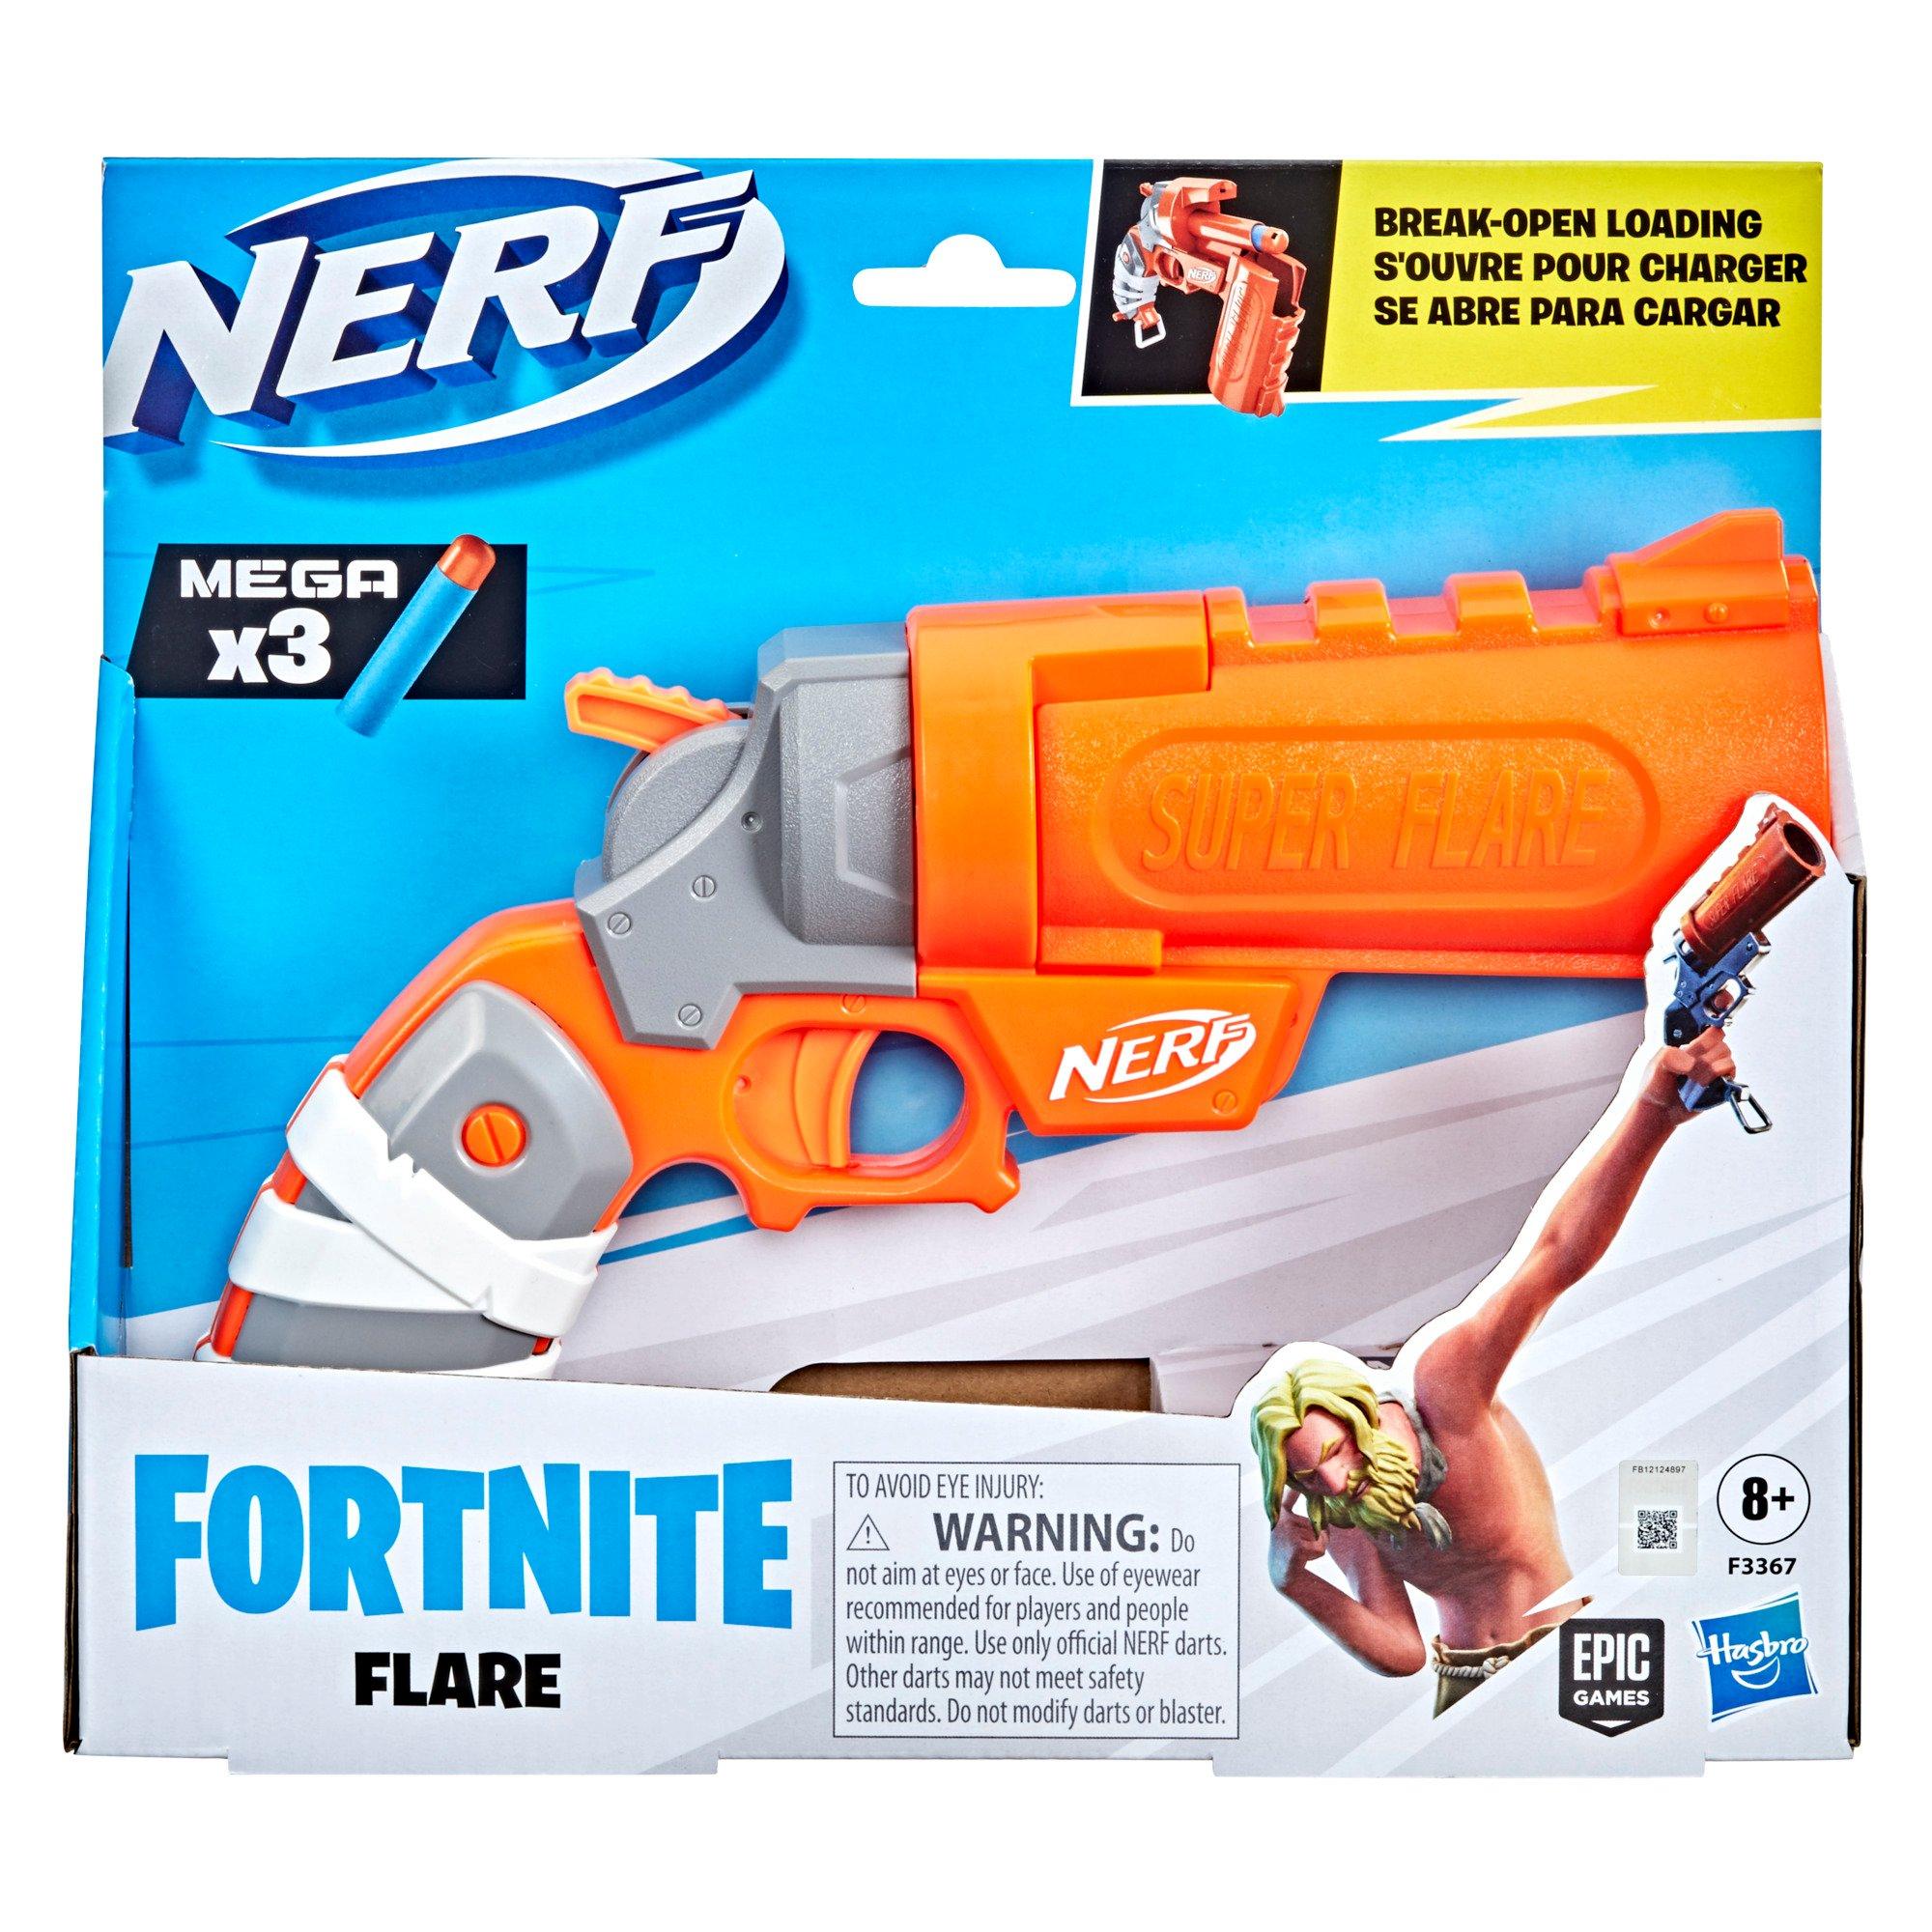 Exclusive: A famous Fortnite gun is getting its own Fortnite Nerf